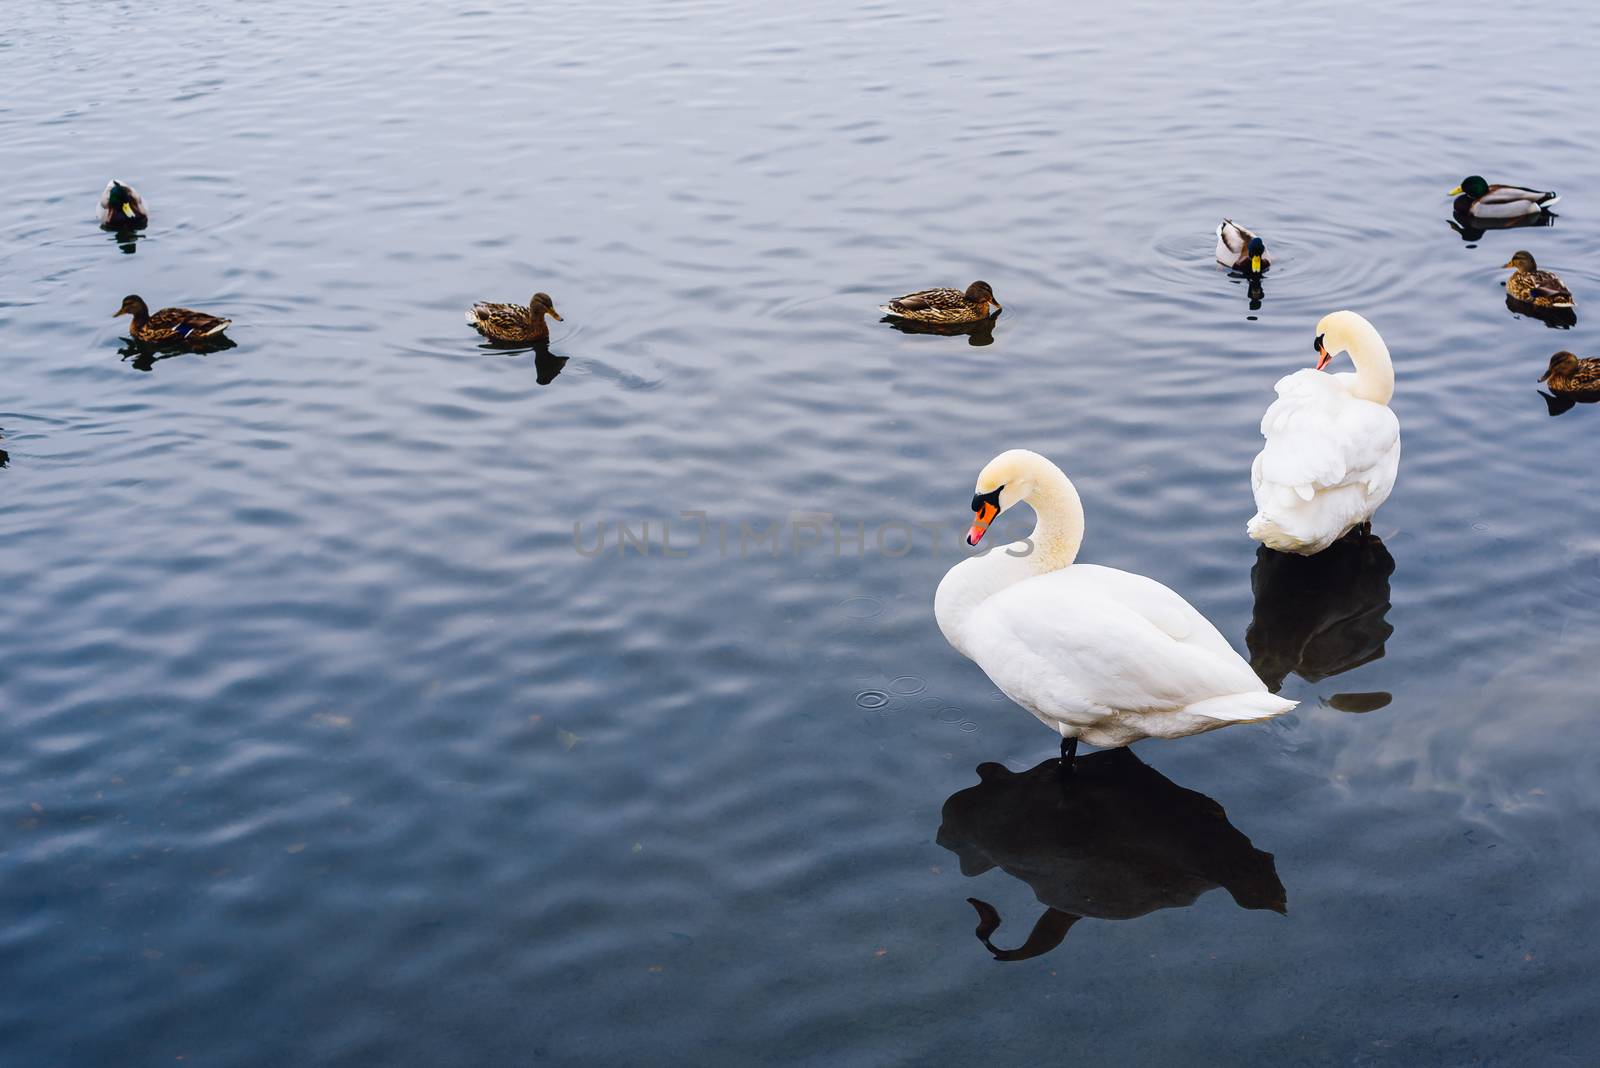 Two Swans stand in Water and Ducks Swim on Backdrop.Copy Space on the Left Side.